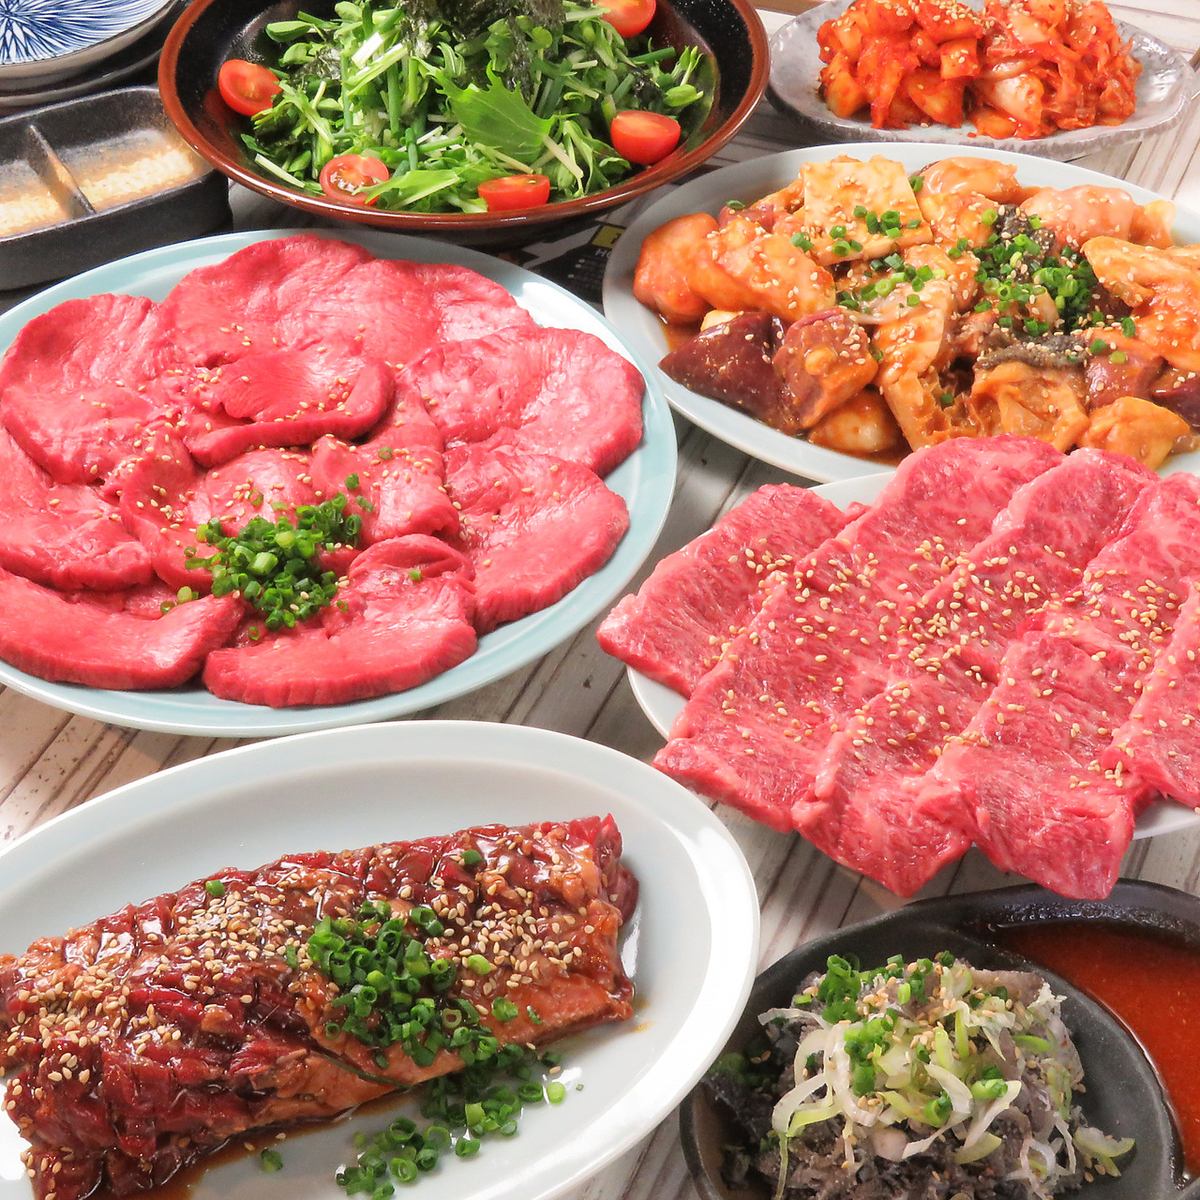 Enjoy delicious meat at a reasonable price♪ Courses start from 5,500 yen including 2 hours of all-you-can-drink!